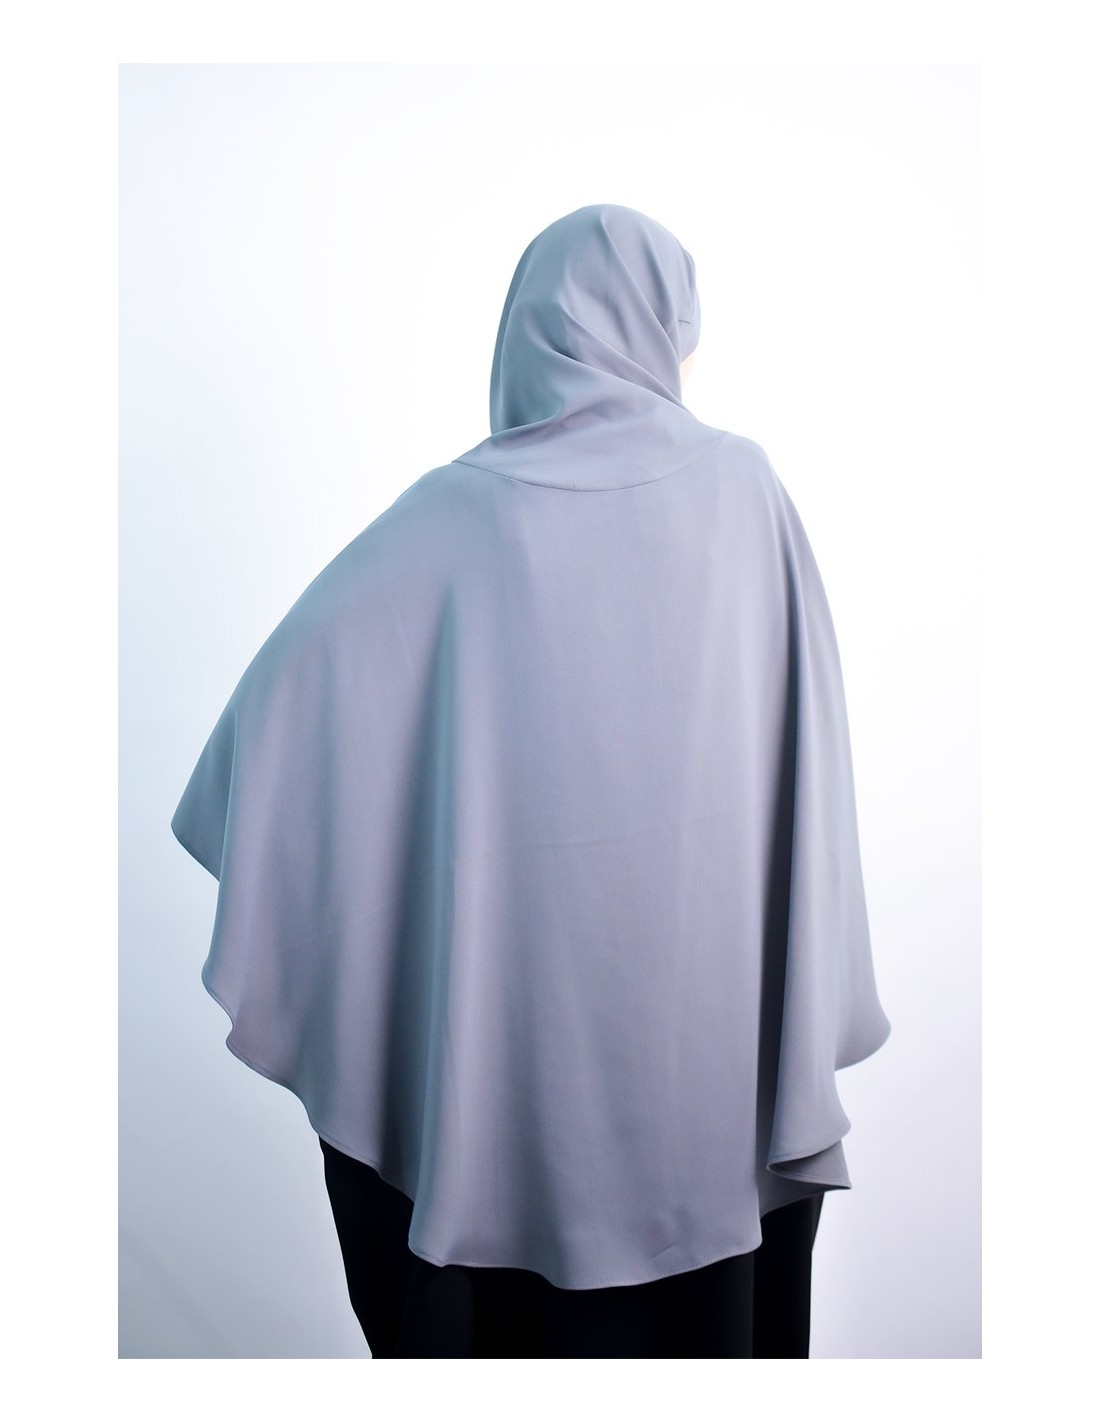 Cape with integrated hijab